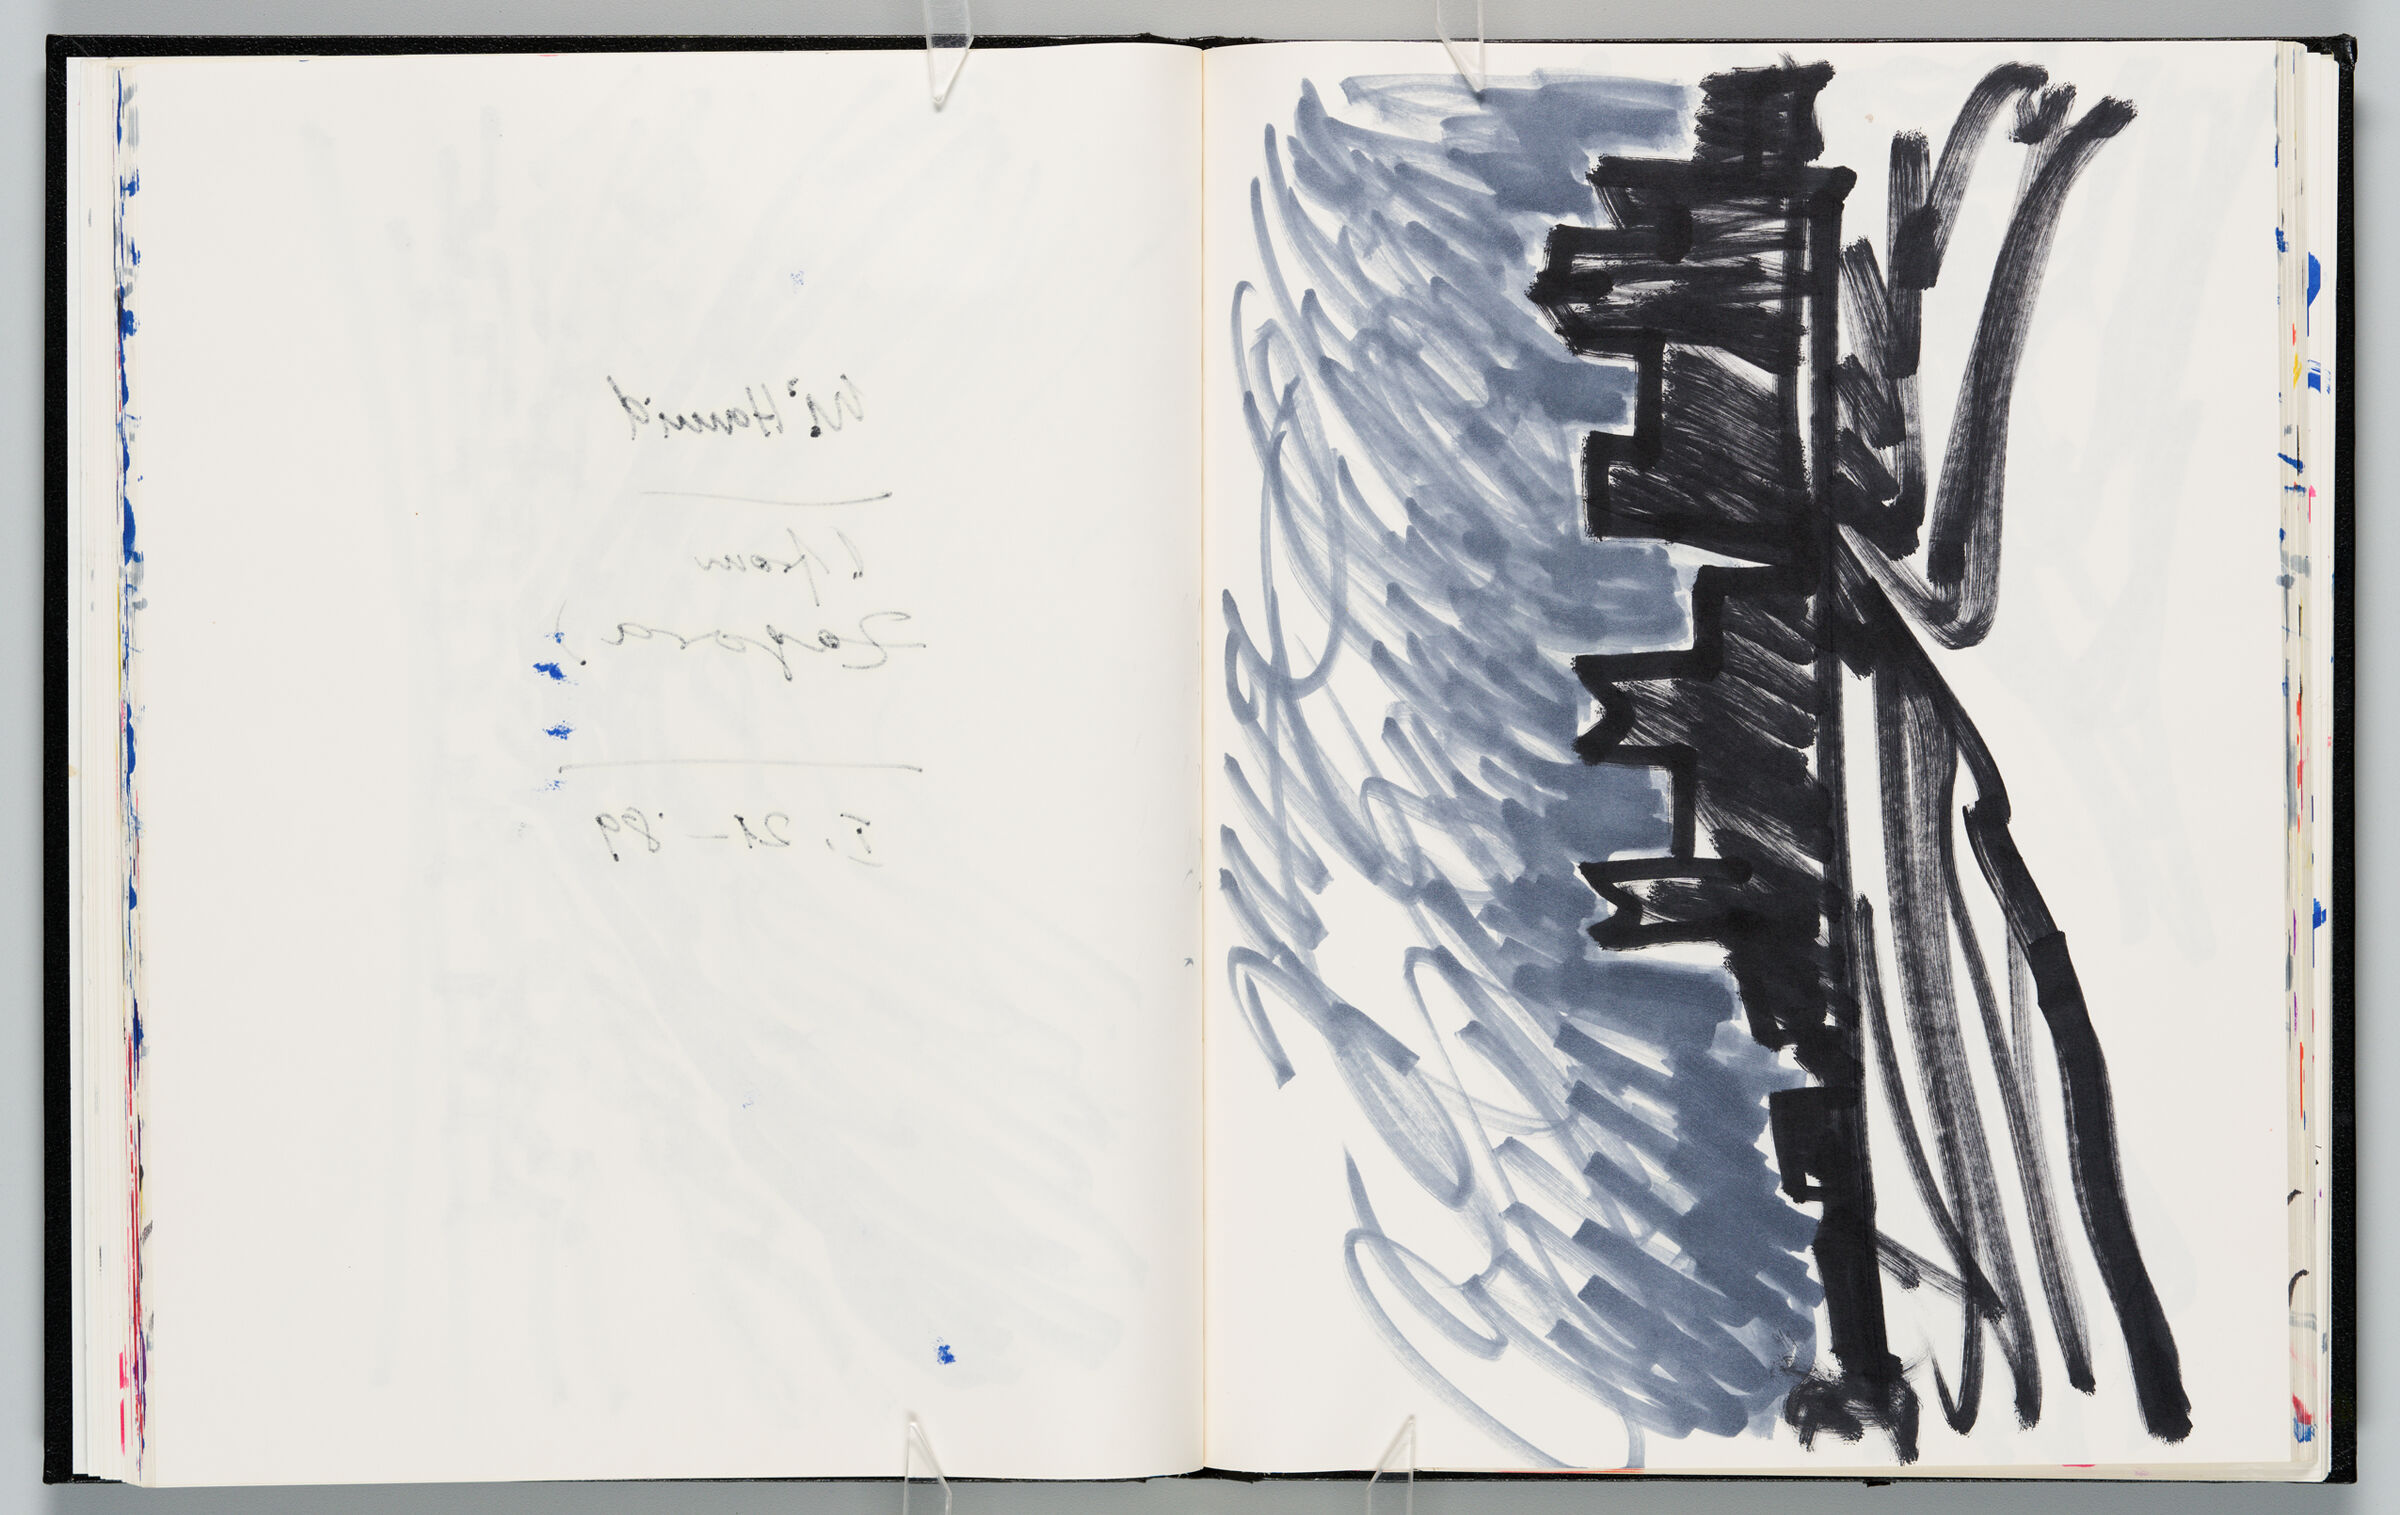 Untitled (Bleed-Through Of Previous Page, Left Page); Untitled (View Of M'hamid Village, Right Page)